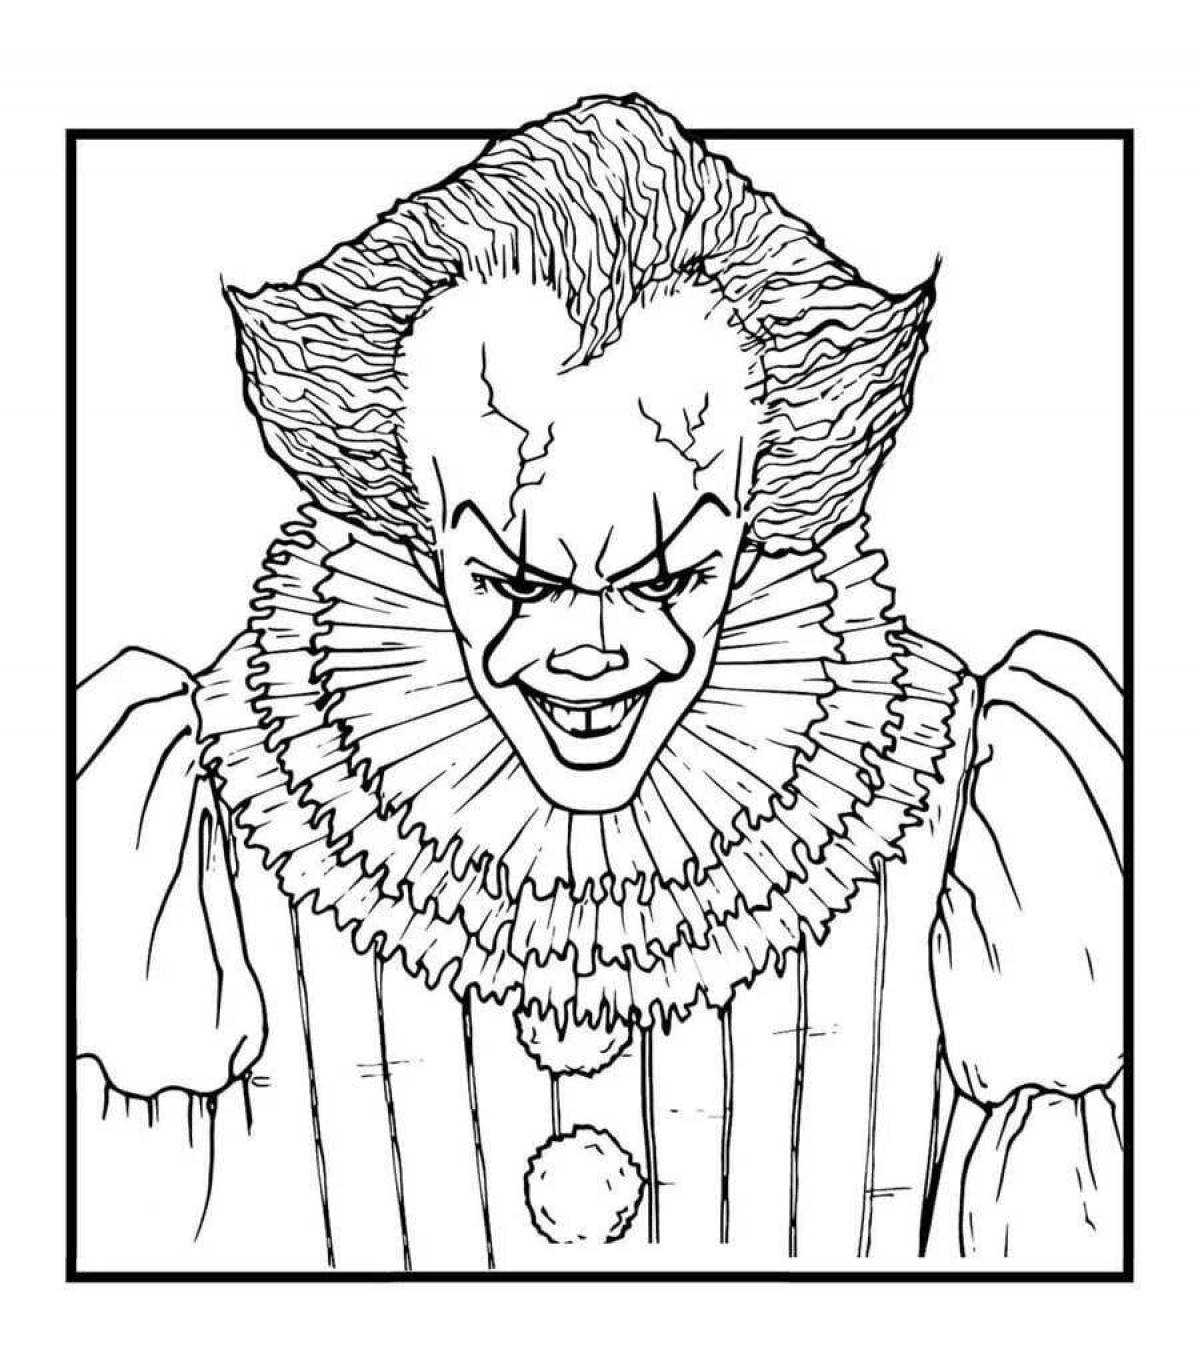 Coloring book glowing clowns